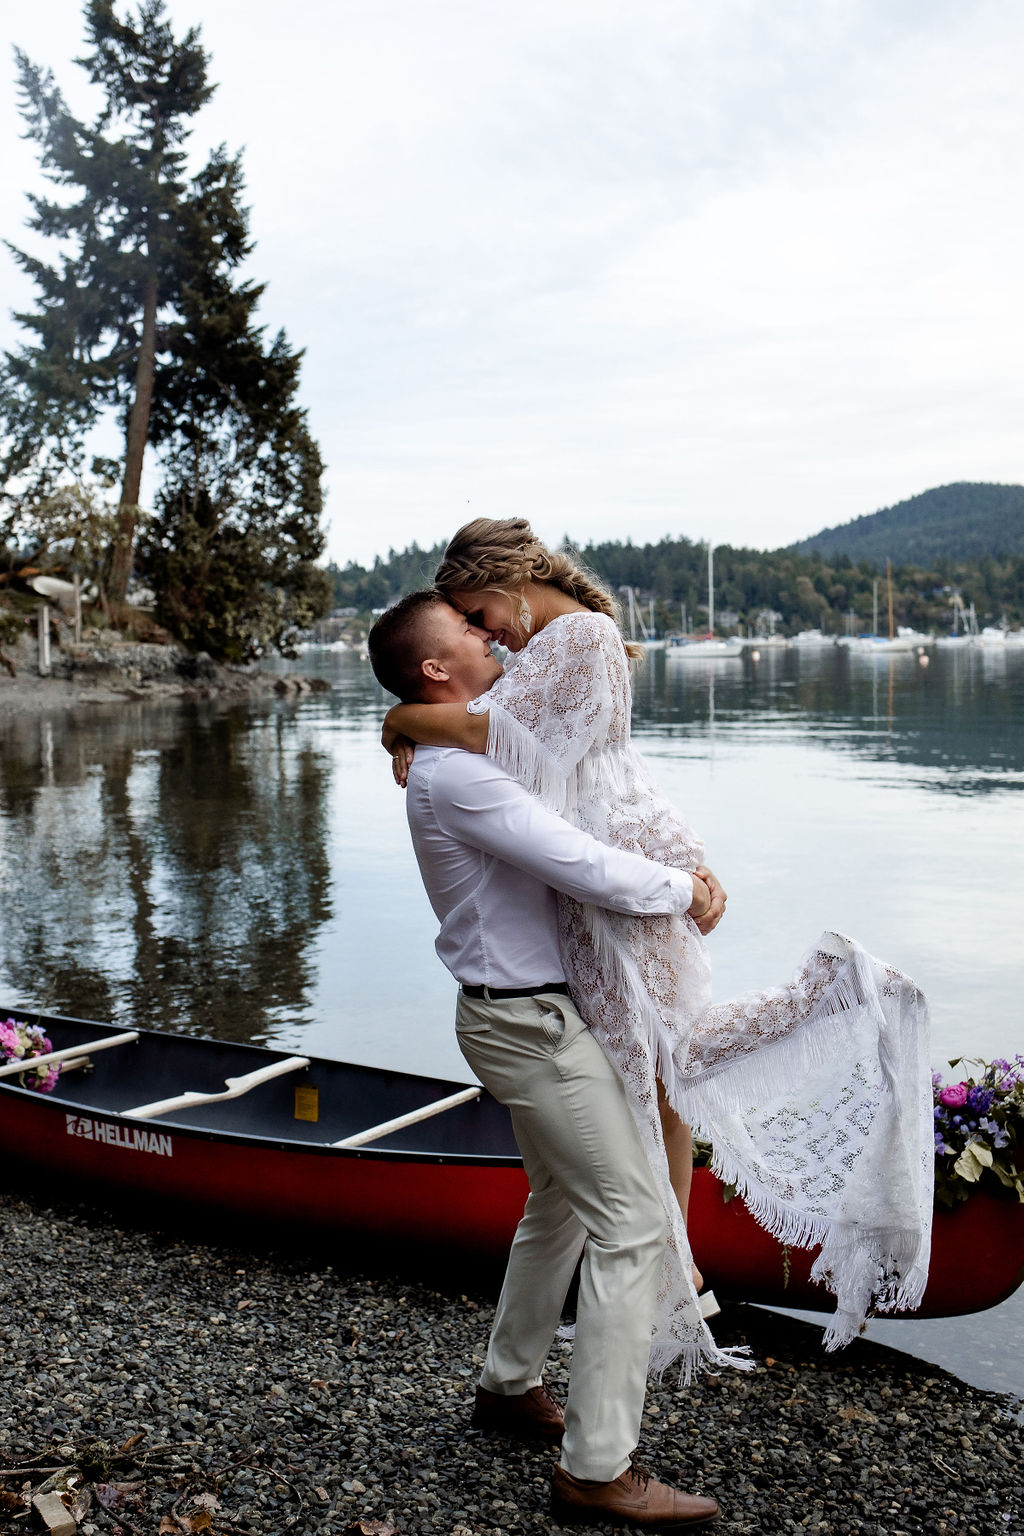 Groom lifts his bride out of a canoe